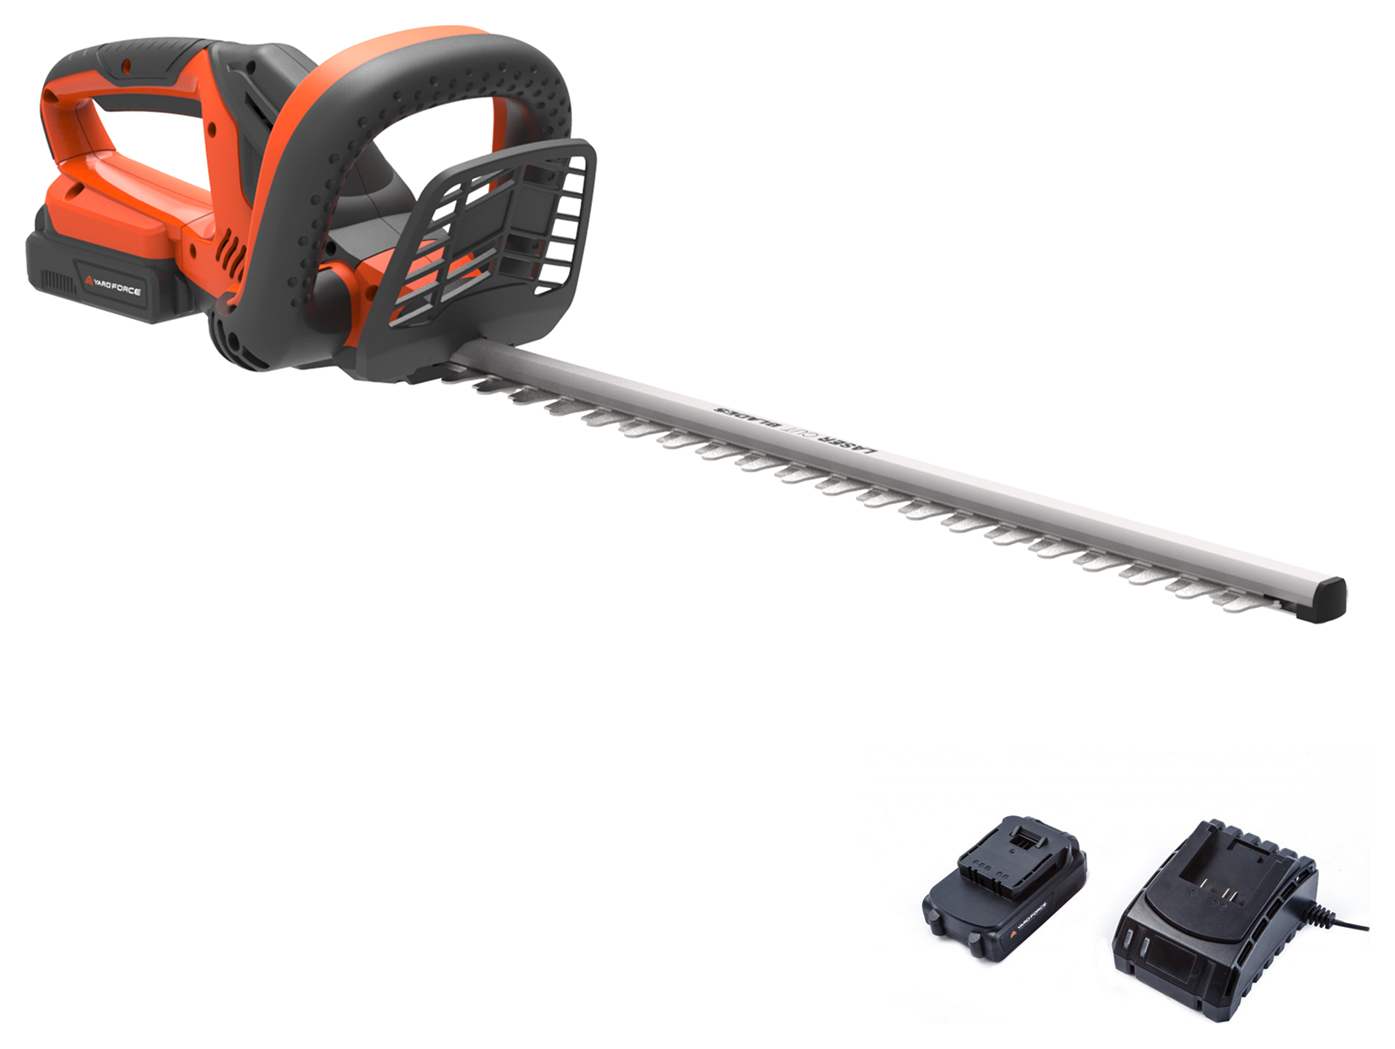 Yard Force LH C45 20V Cordless Hedge Trimmer 1 x 2.0Ah Li-Ion Battery & Charger